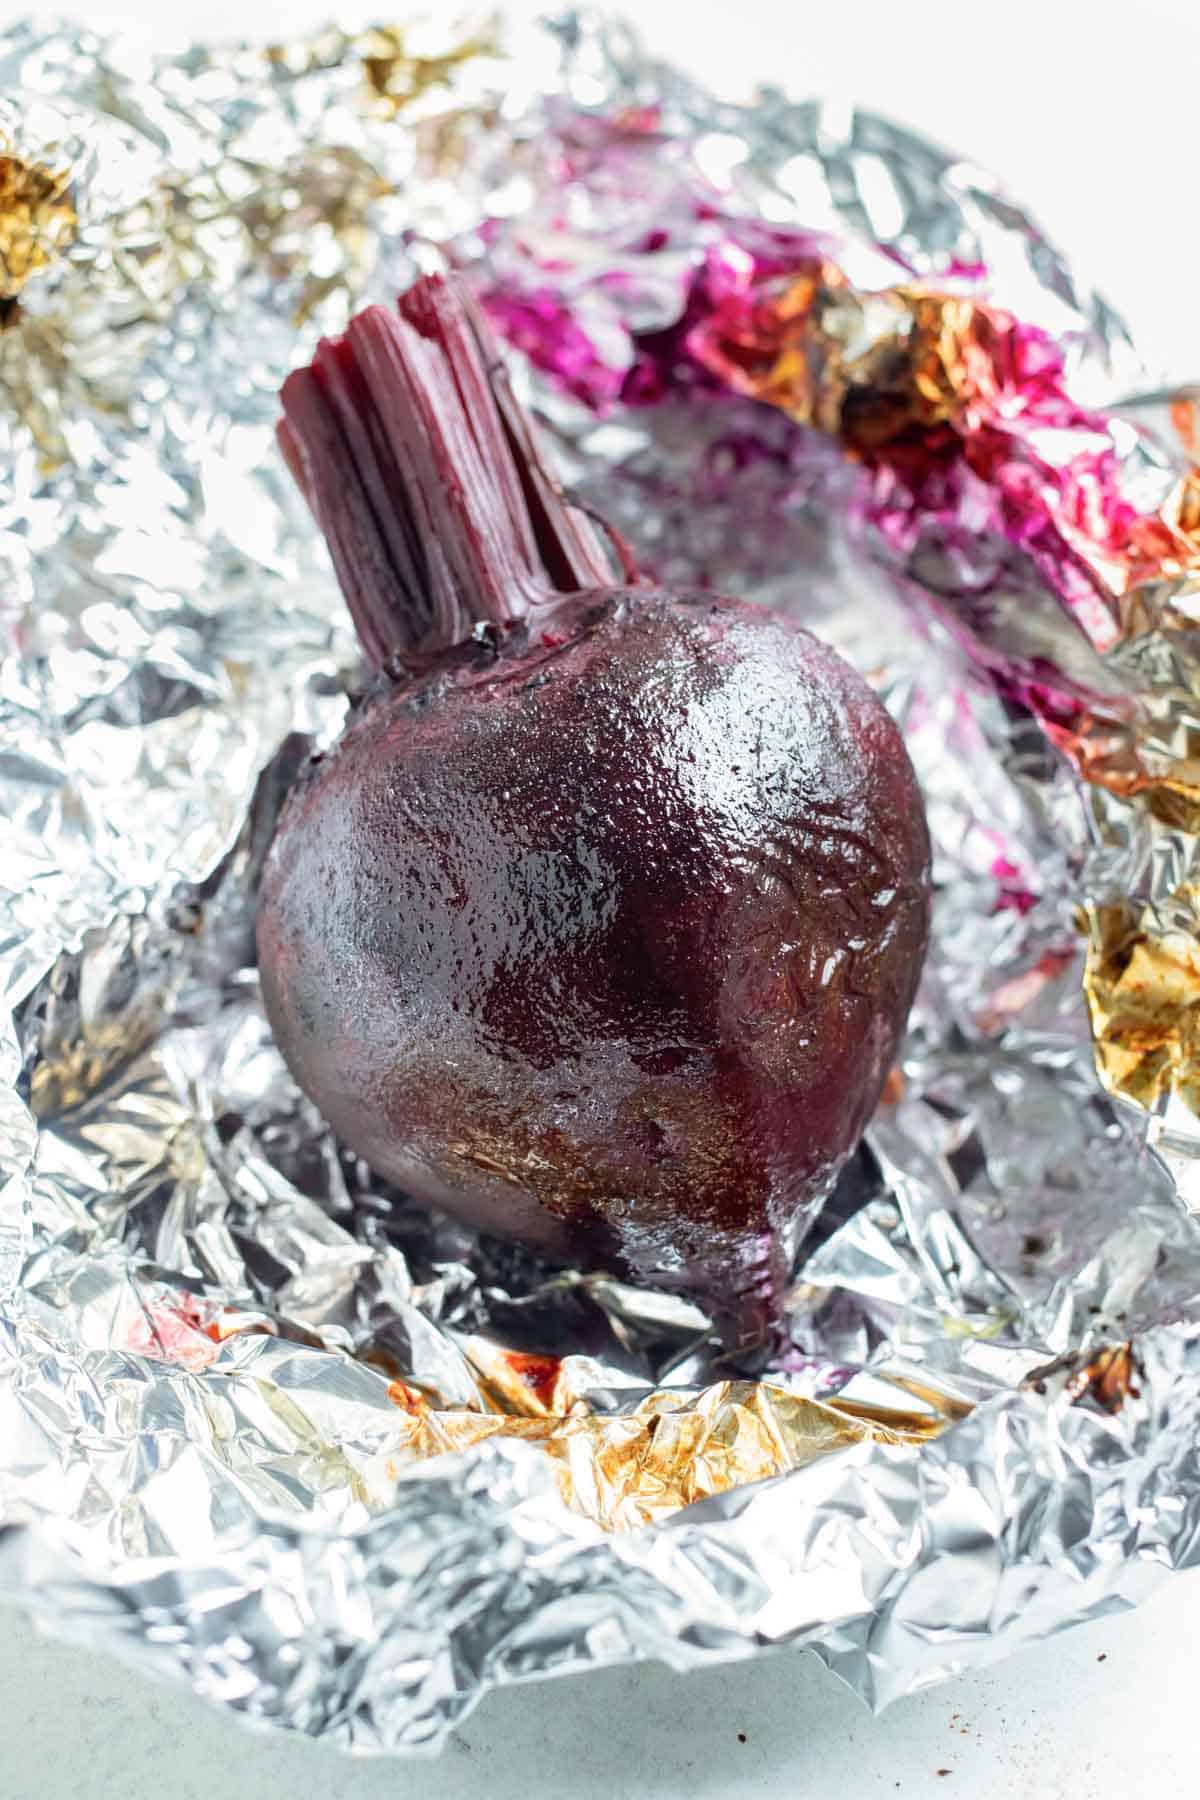 Roasted beets are unwrapped and ready to be peeled.